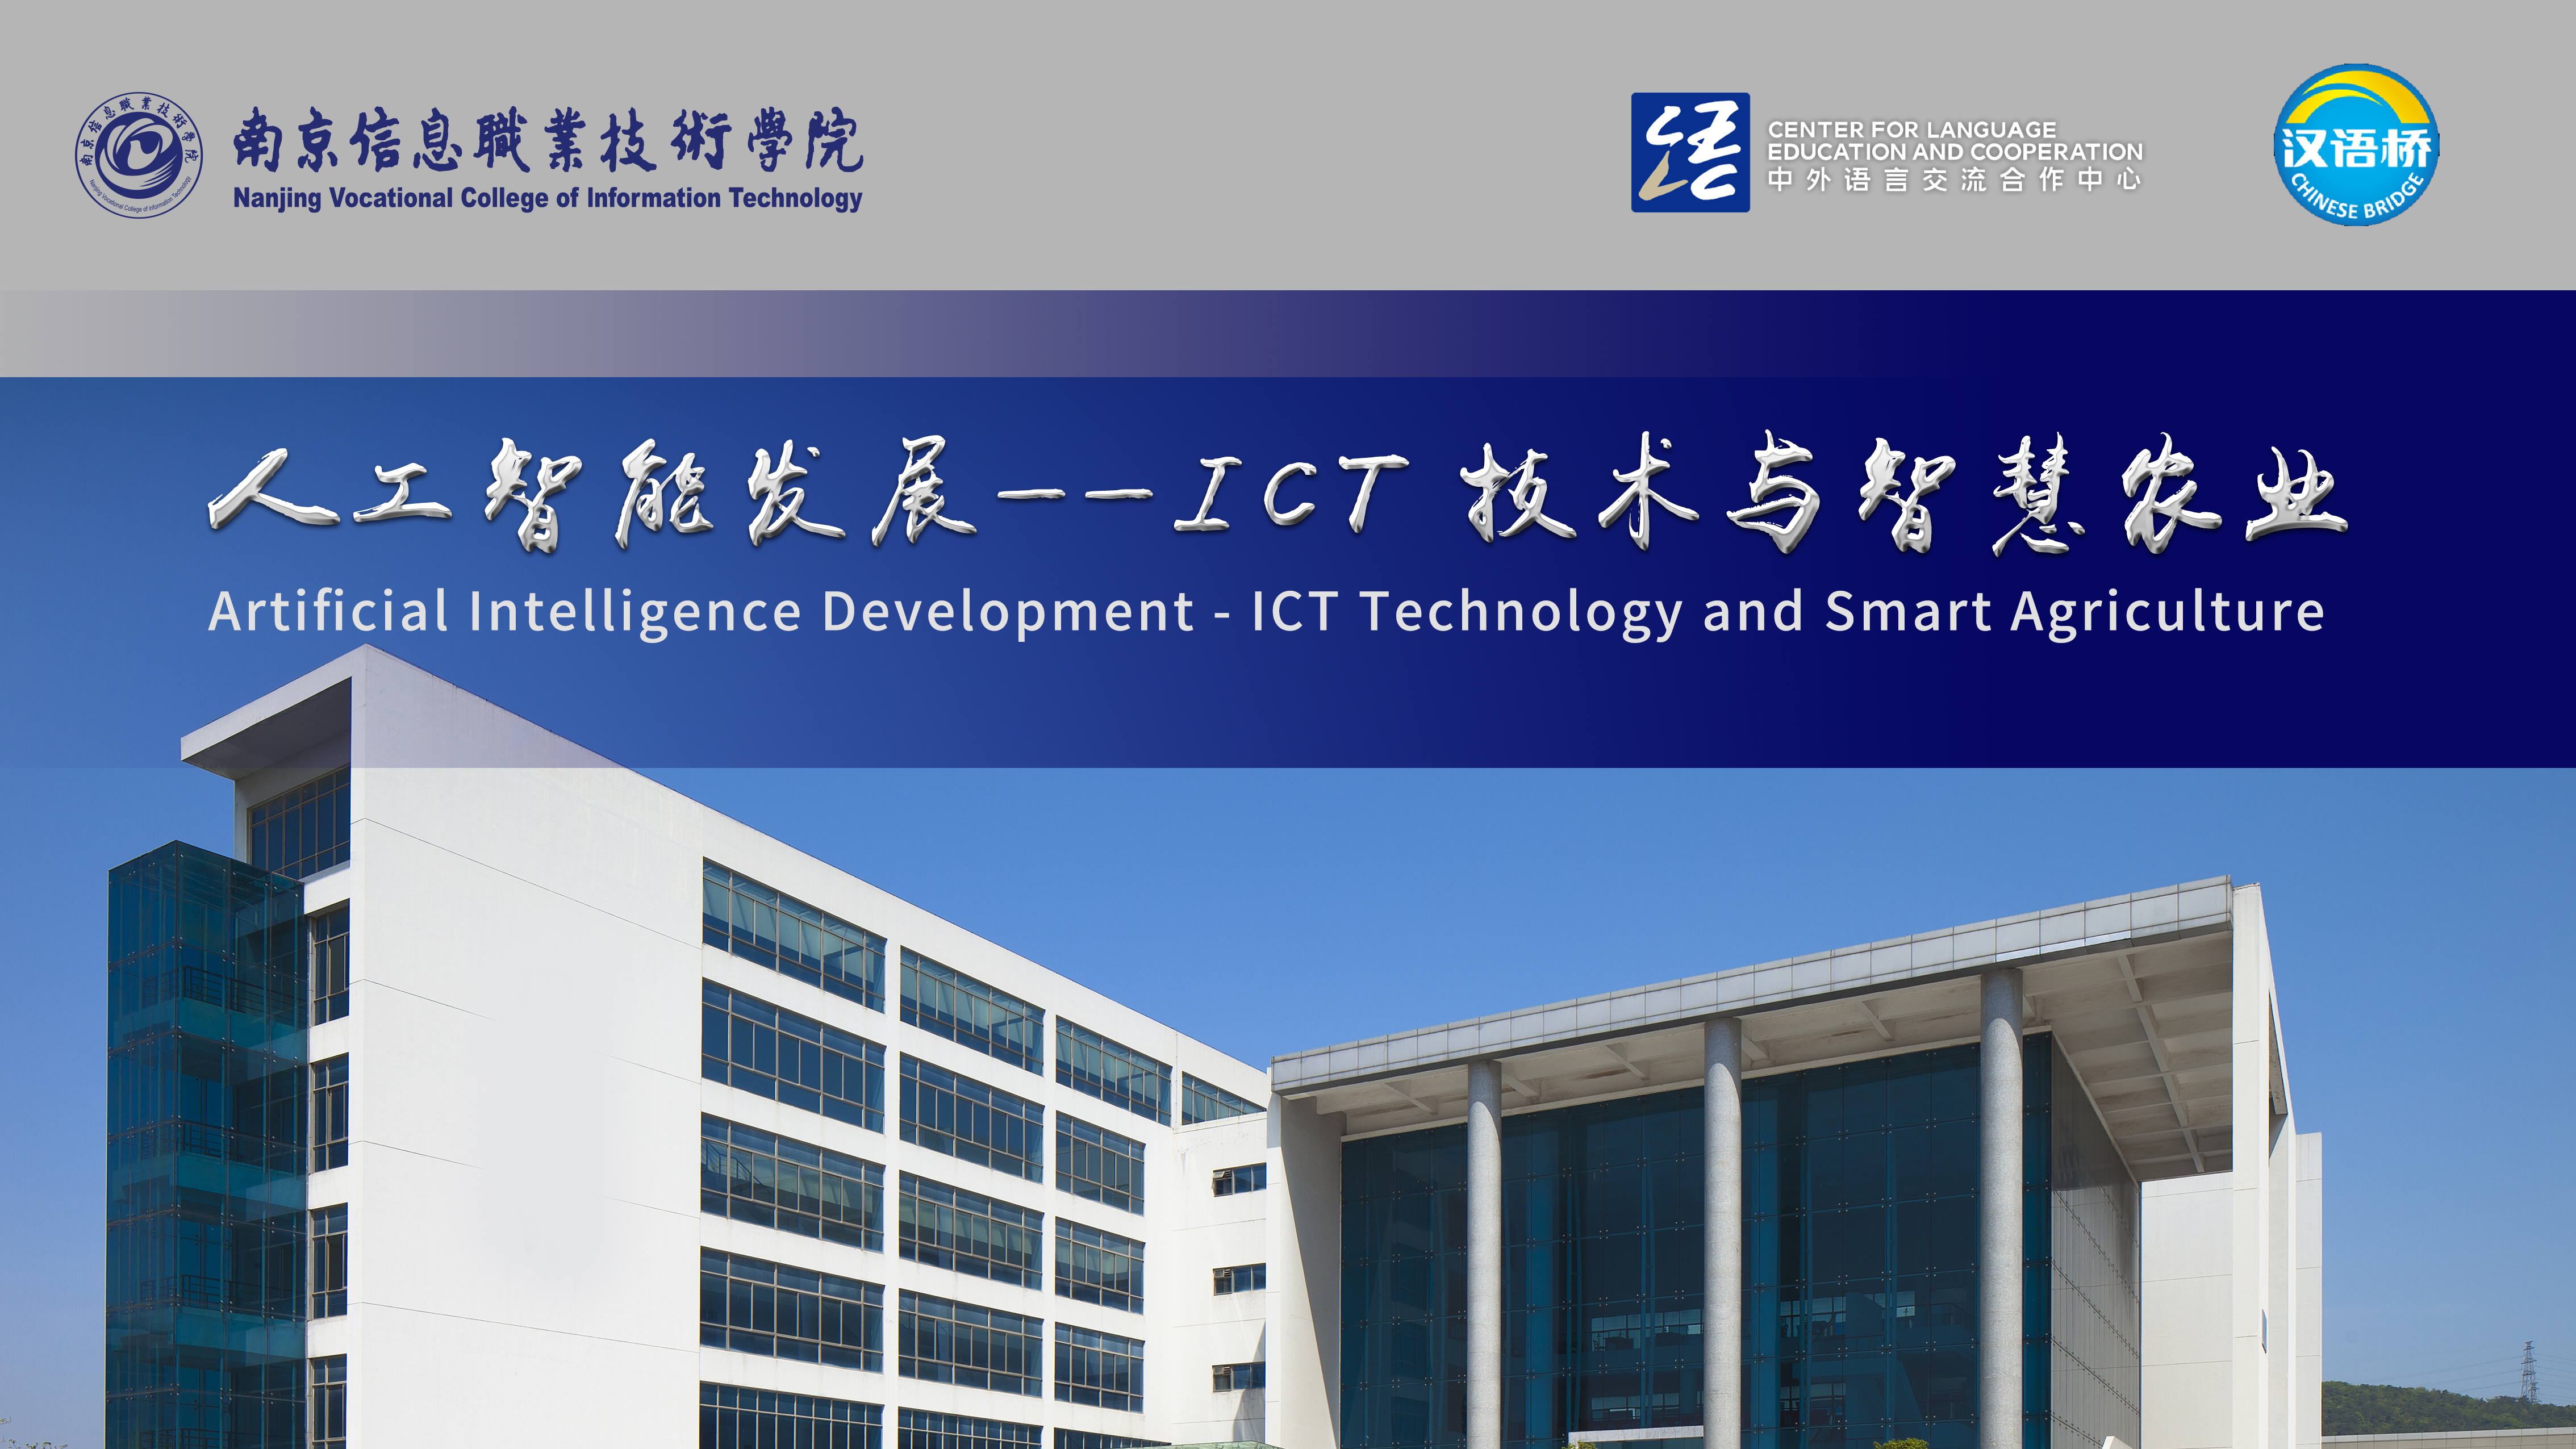 Artificial Intelligence Development - ICT Technology and Smart Agriculture